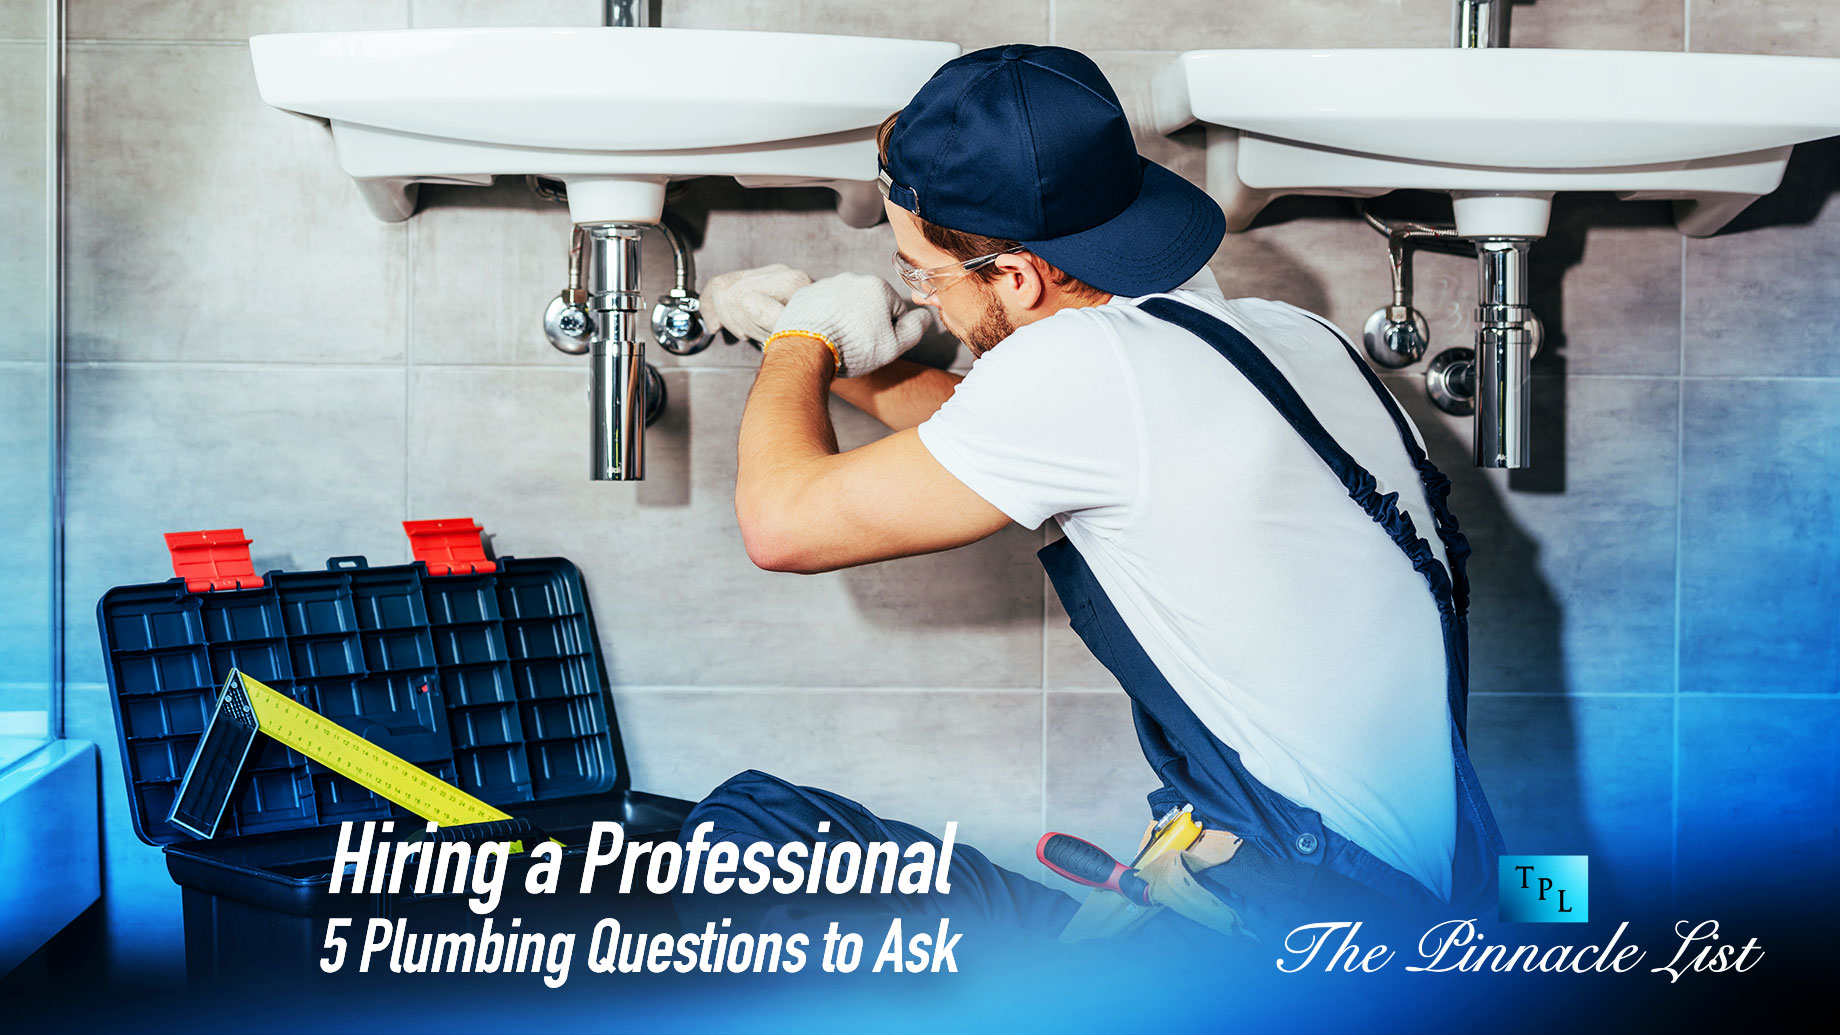 Hiring a Professional: 5 Plumbing Questions to Ask